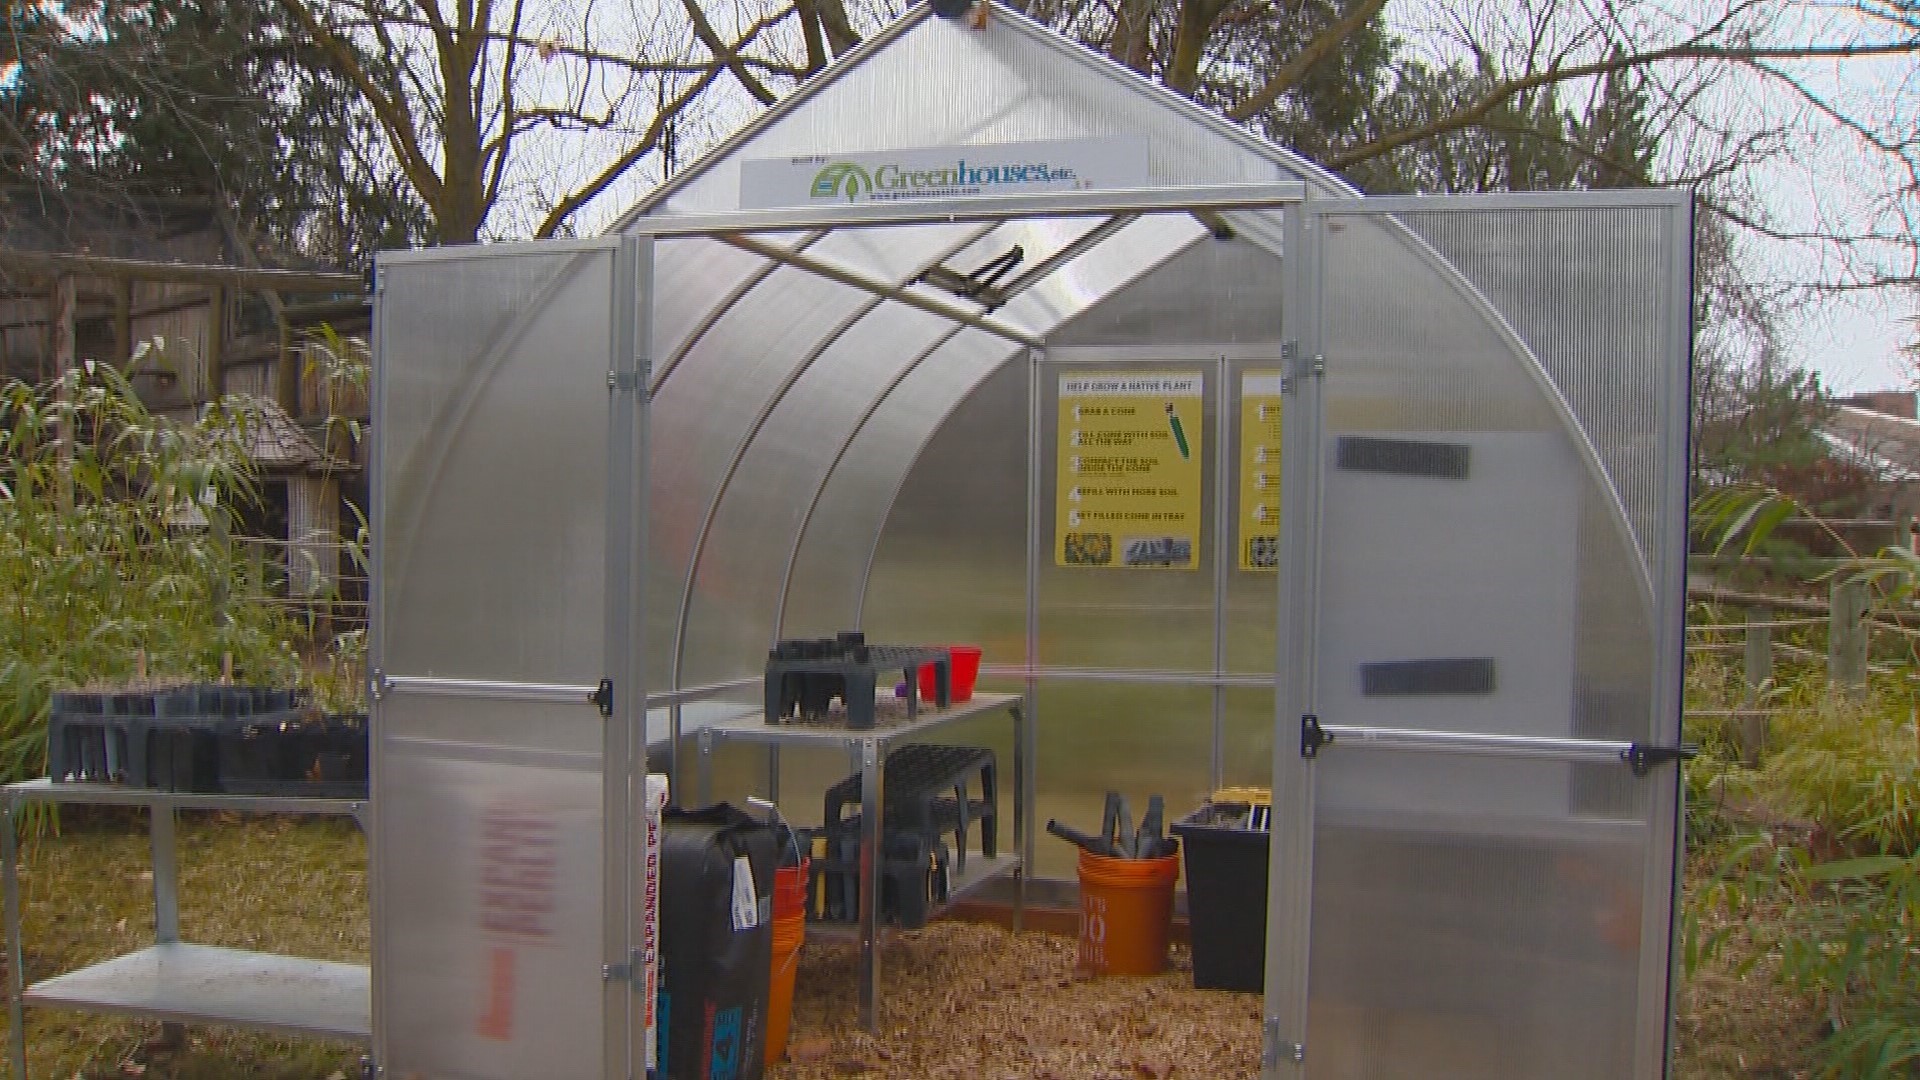 Garden master Jim Duthie shows us some options to consider for a backyard greenhouse.